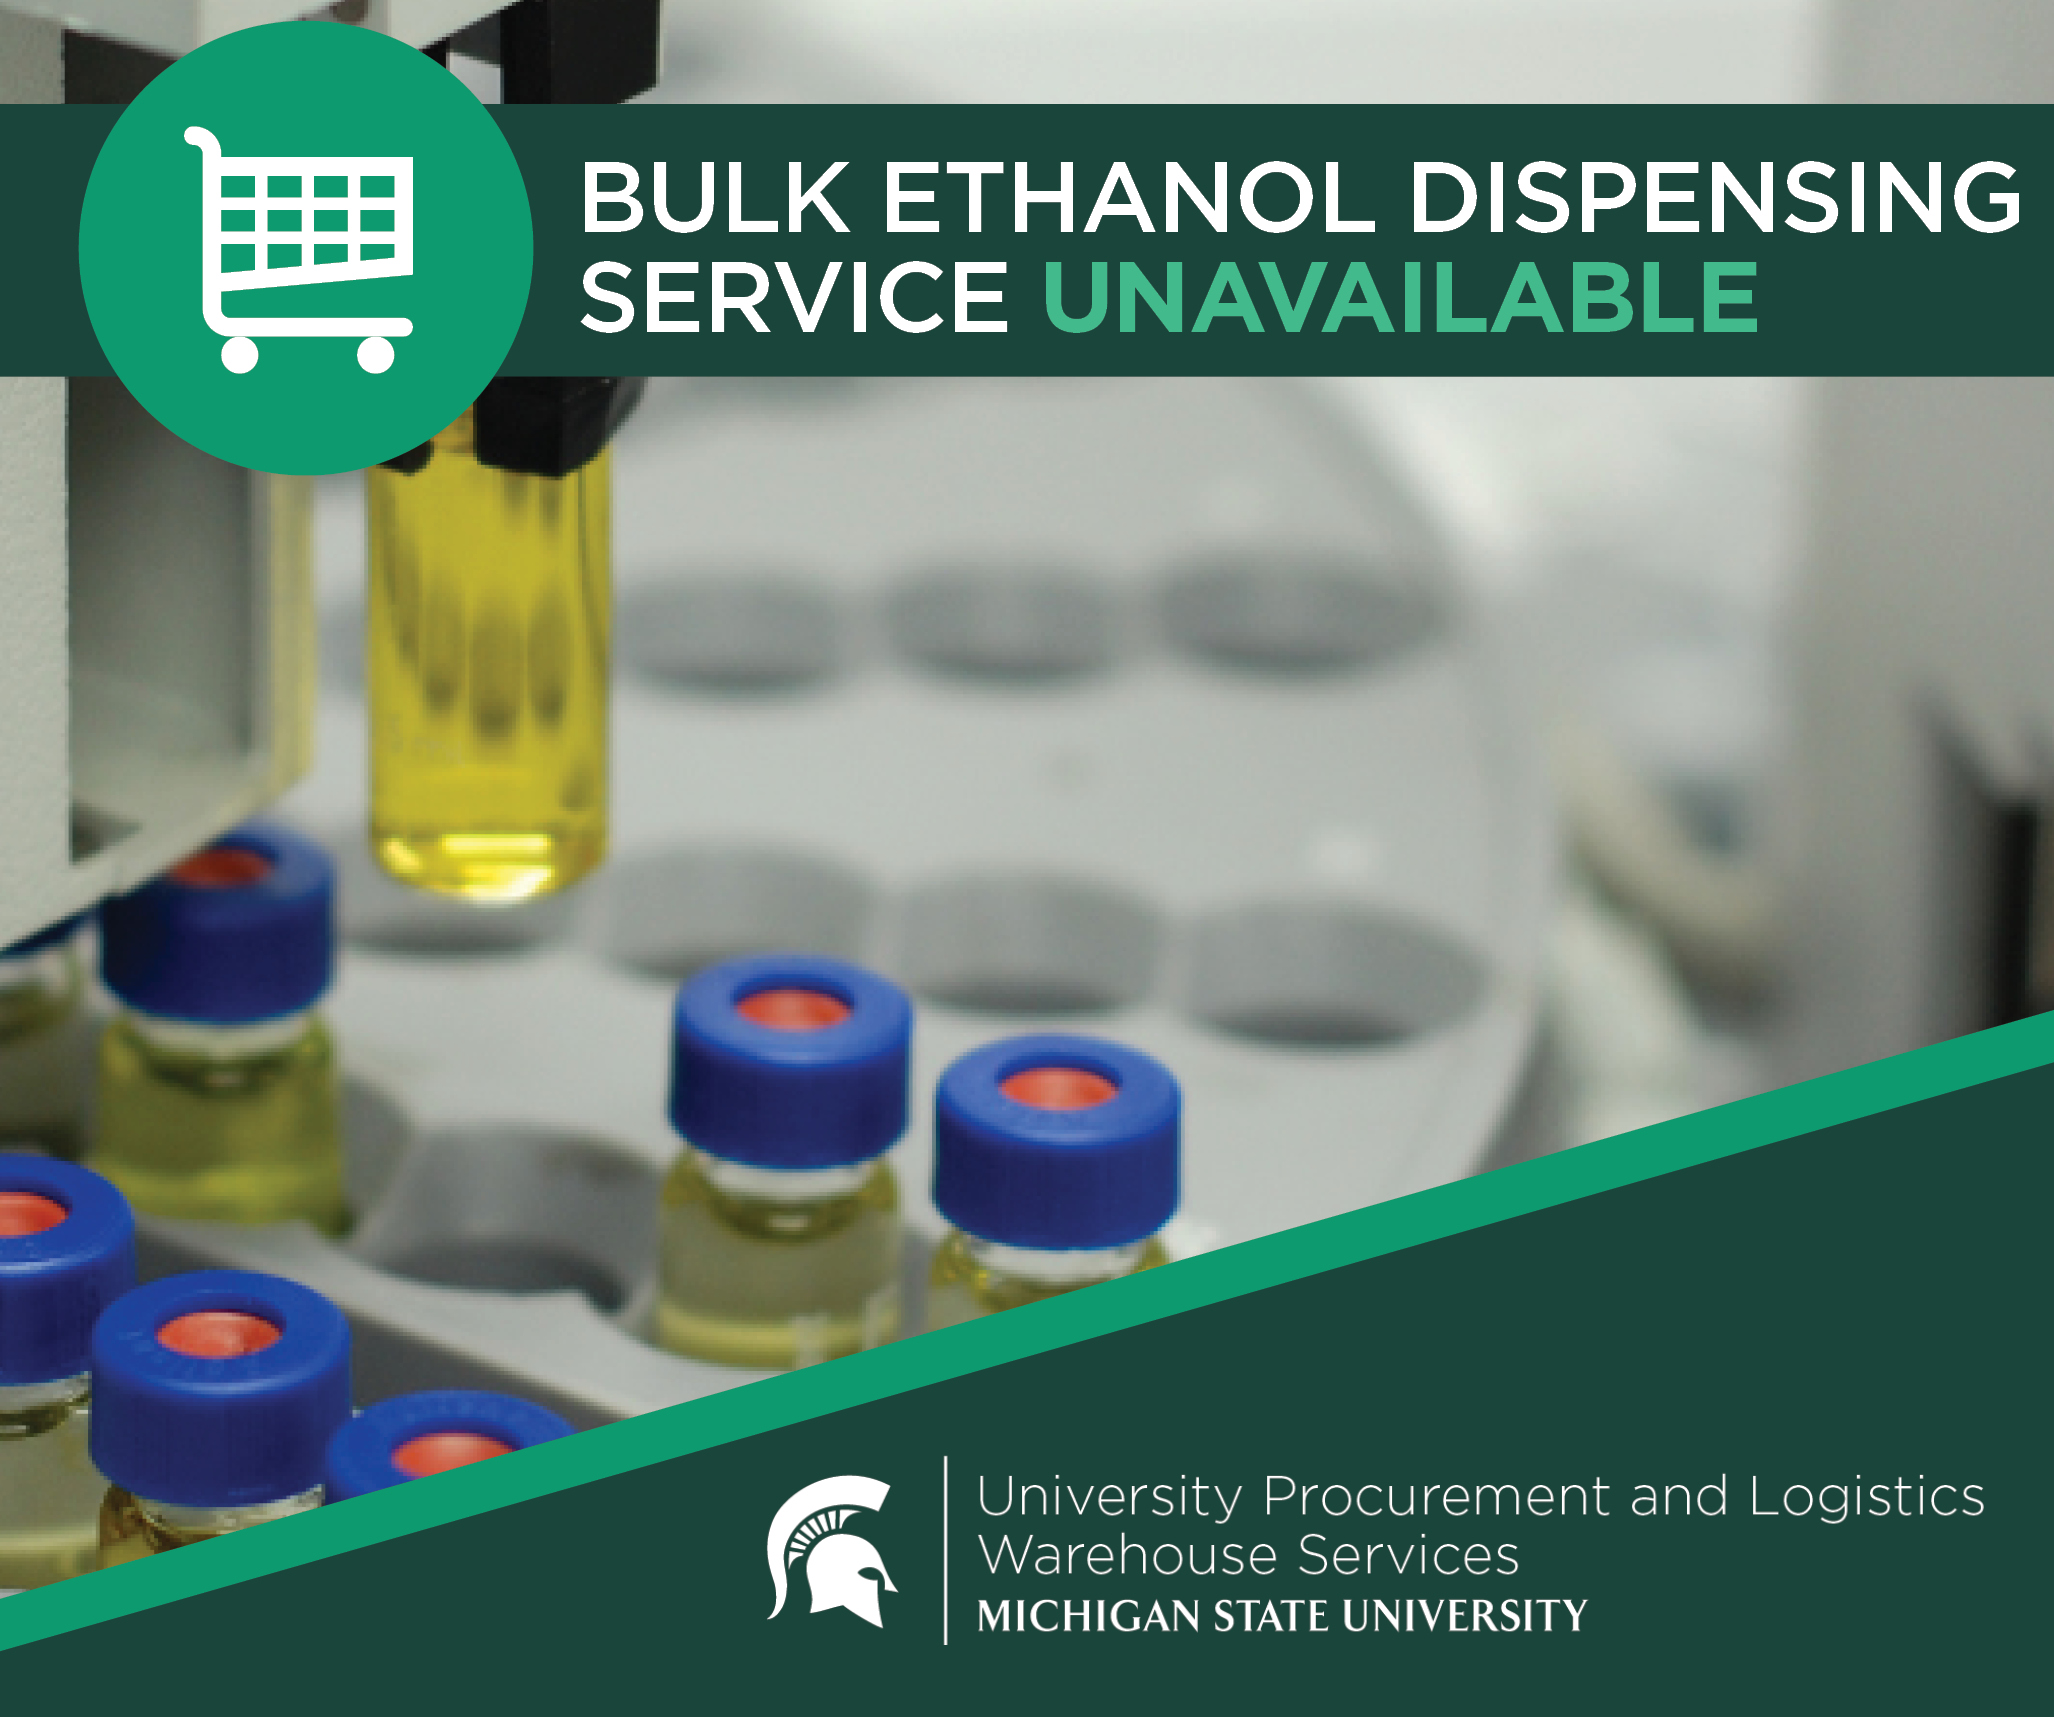  A graphic headline reading "Bulk ethanol dispensing service unavailable" beside an icon of a shopping cart. Below is a photo of ethanol being used in a lab machine. In the bottom right corner is a green with the University Procurement and Logistics Warehouse Services signature logo.